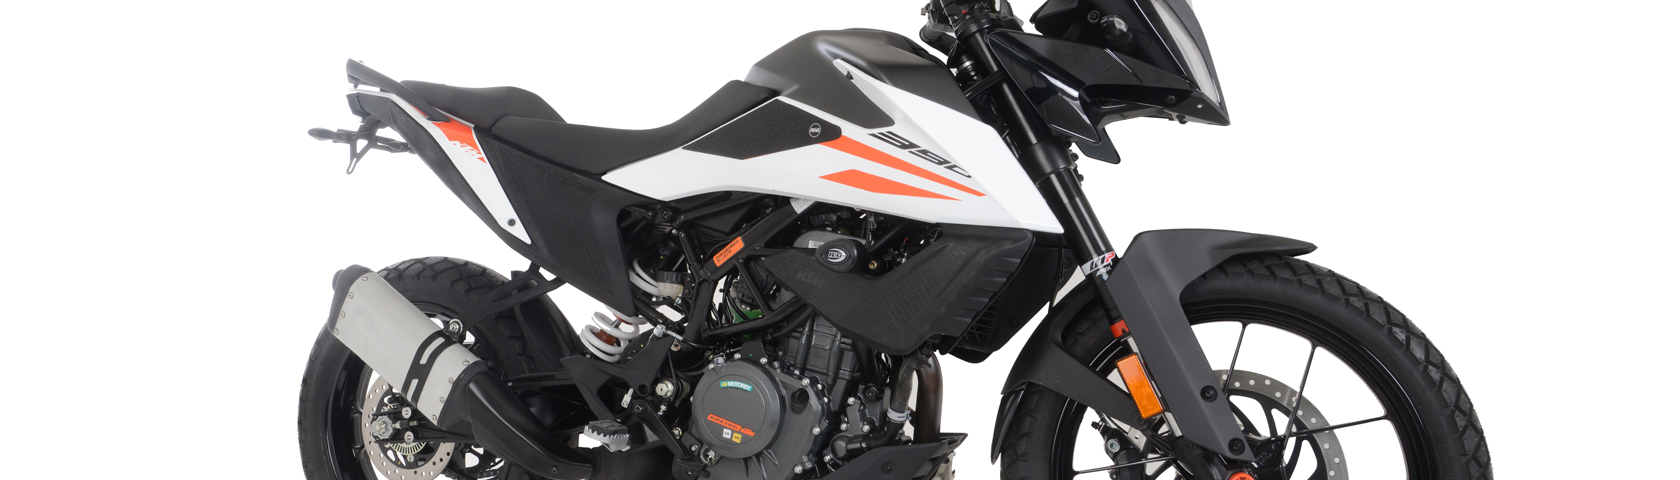 New R&G Parts Available for Your KTM 390 ADVENTURE